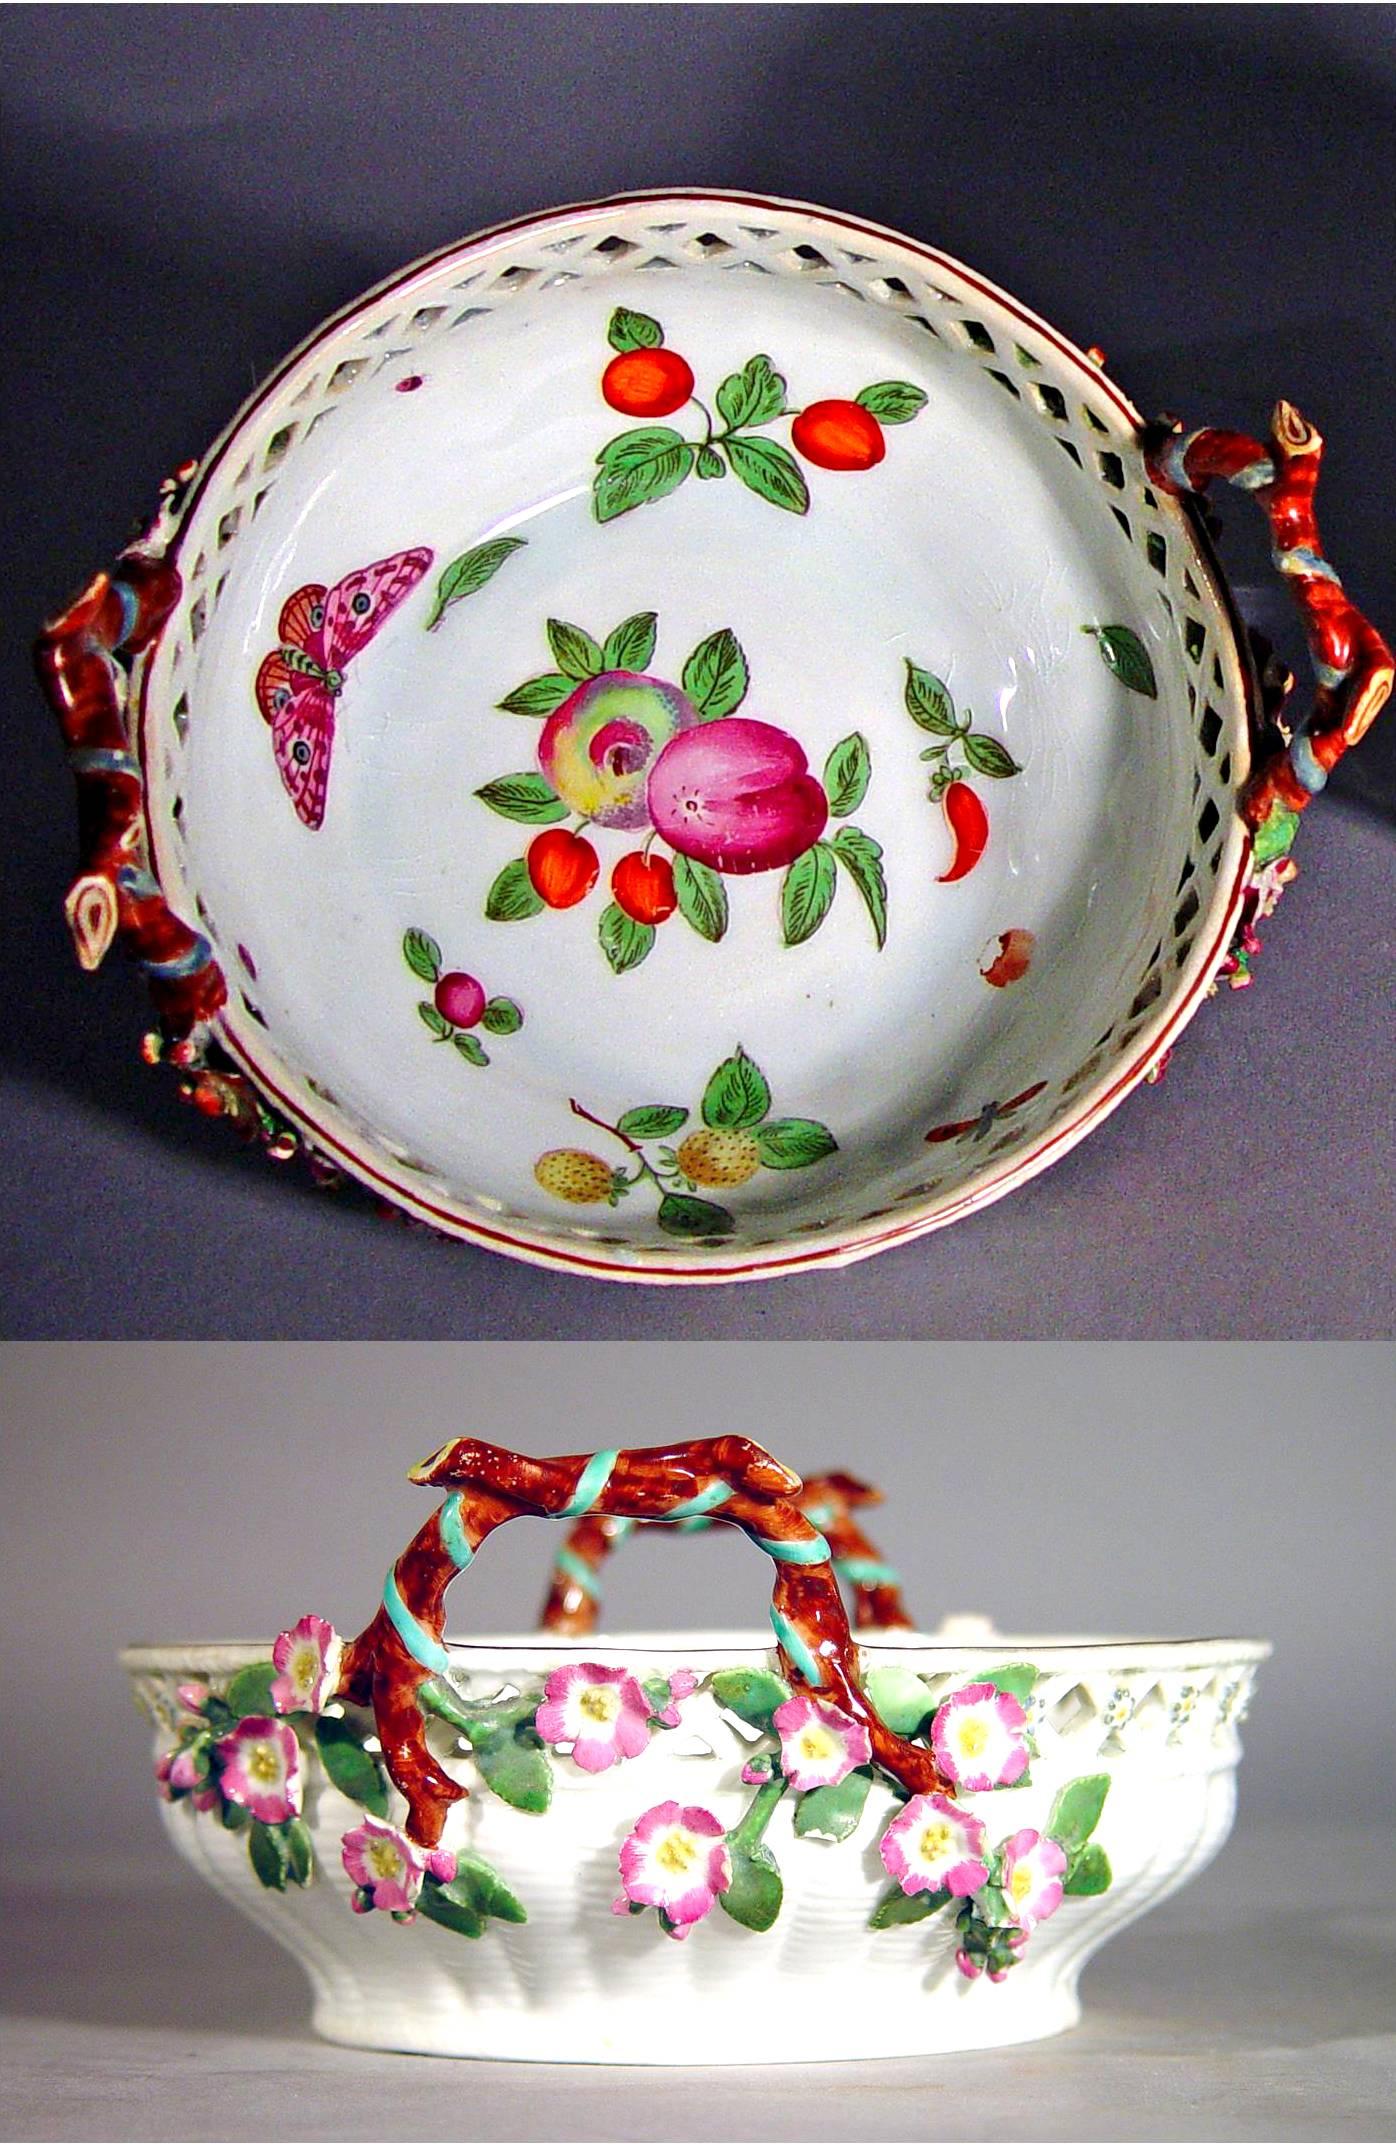 Antique Chelsea porcelain reticulated circular basket, 
Probably James Giles decoration,
circa 1755-1760.

The circular Chelsea porcelain basket with brown twig handles terminating in leaves and flowers has a border of openwork, the rim painted